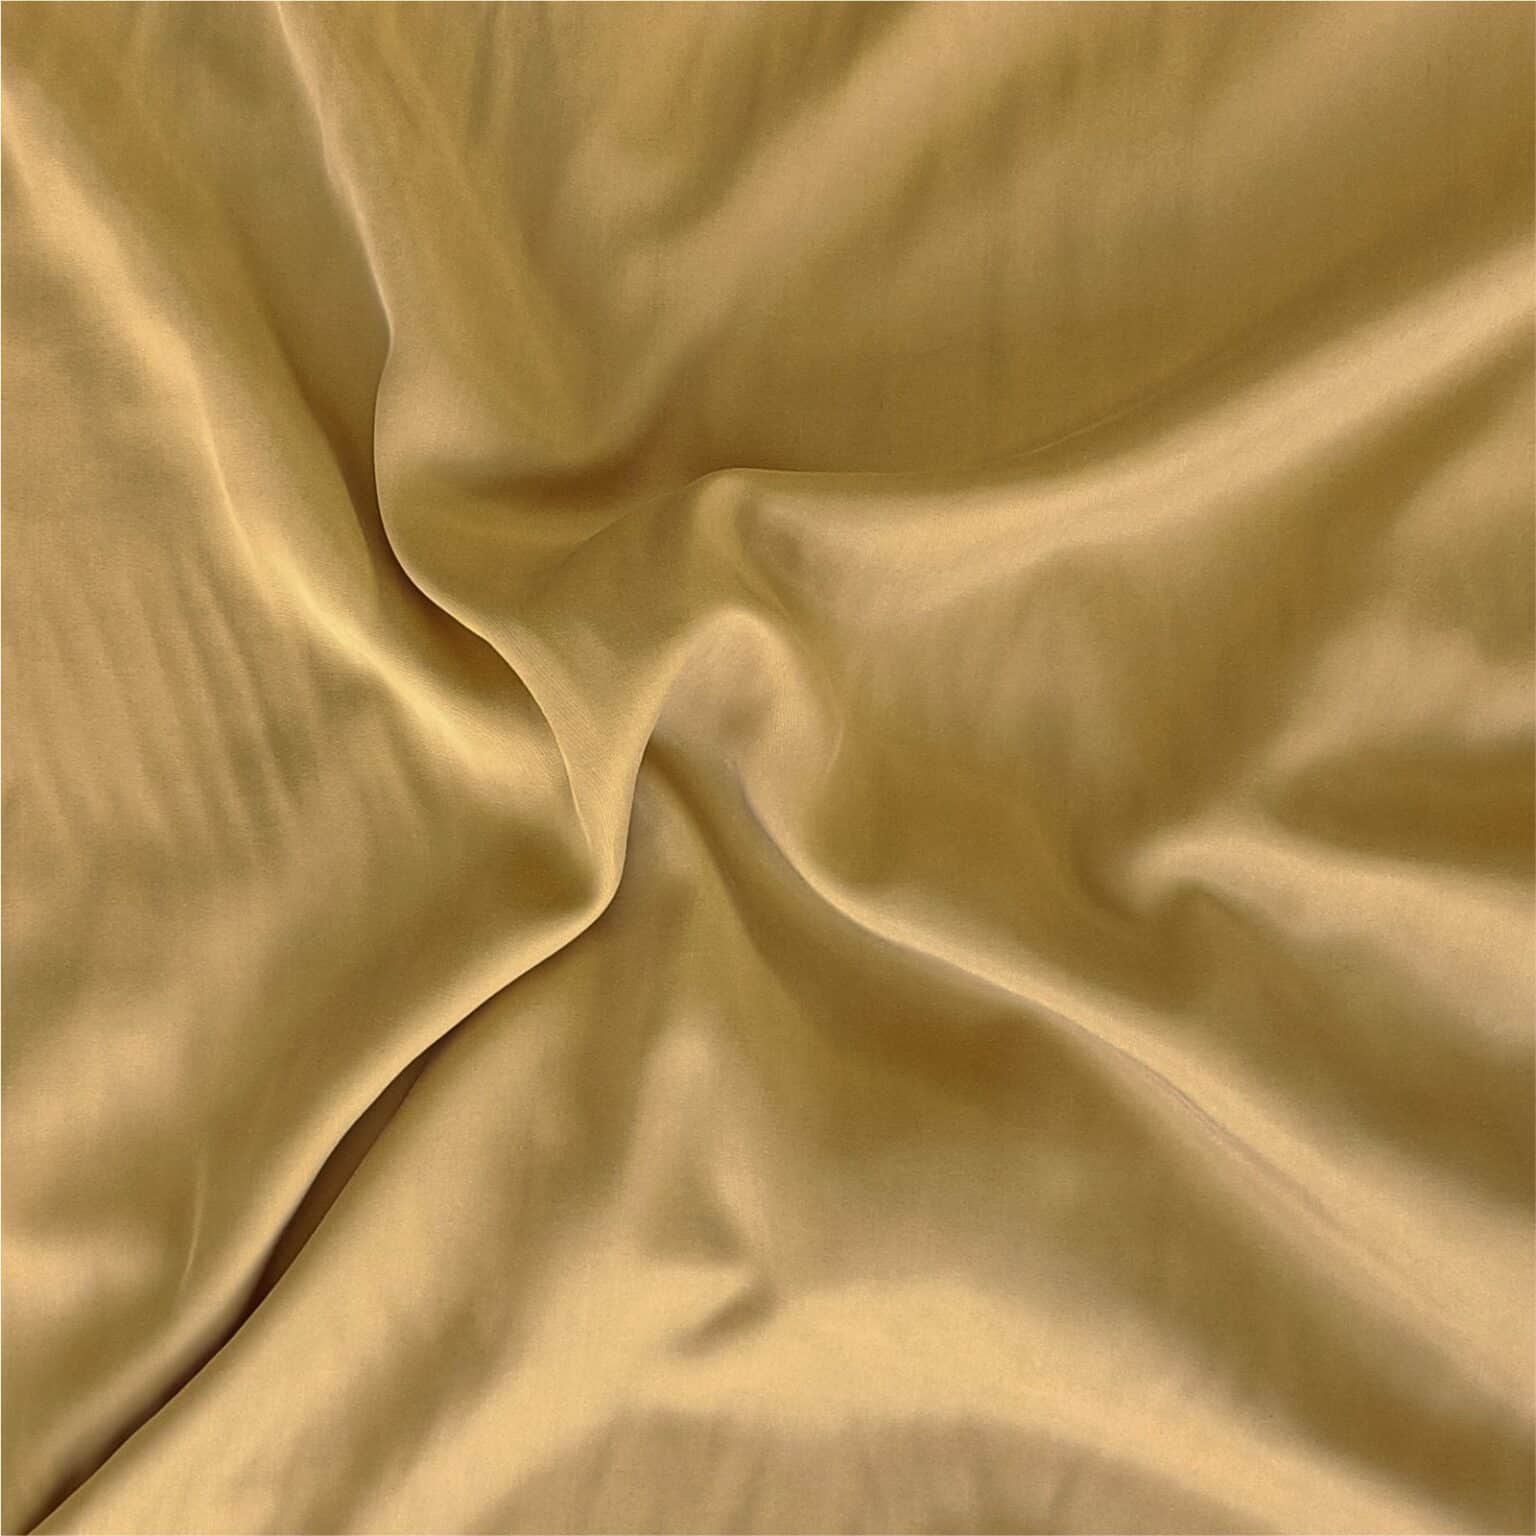 Ochre soft touch lyocell fabric | More Sewing